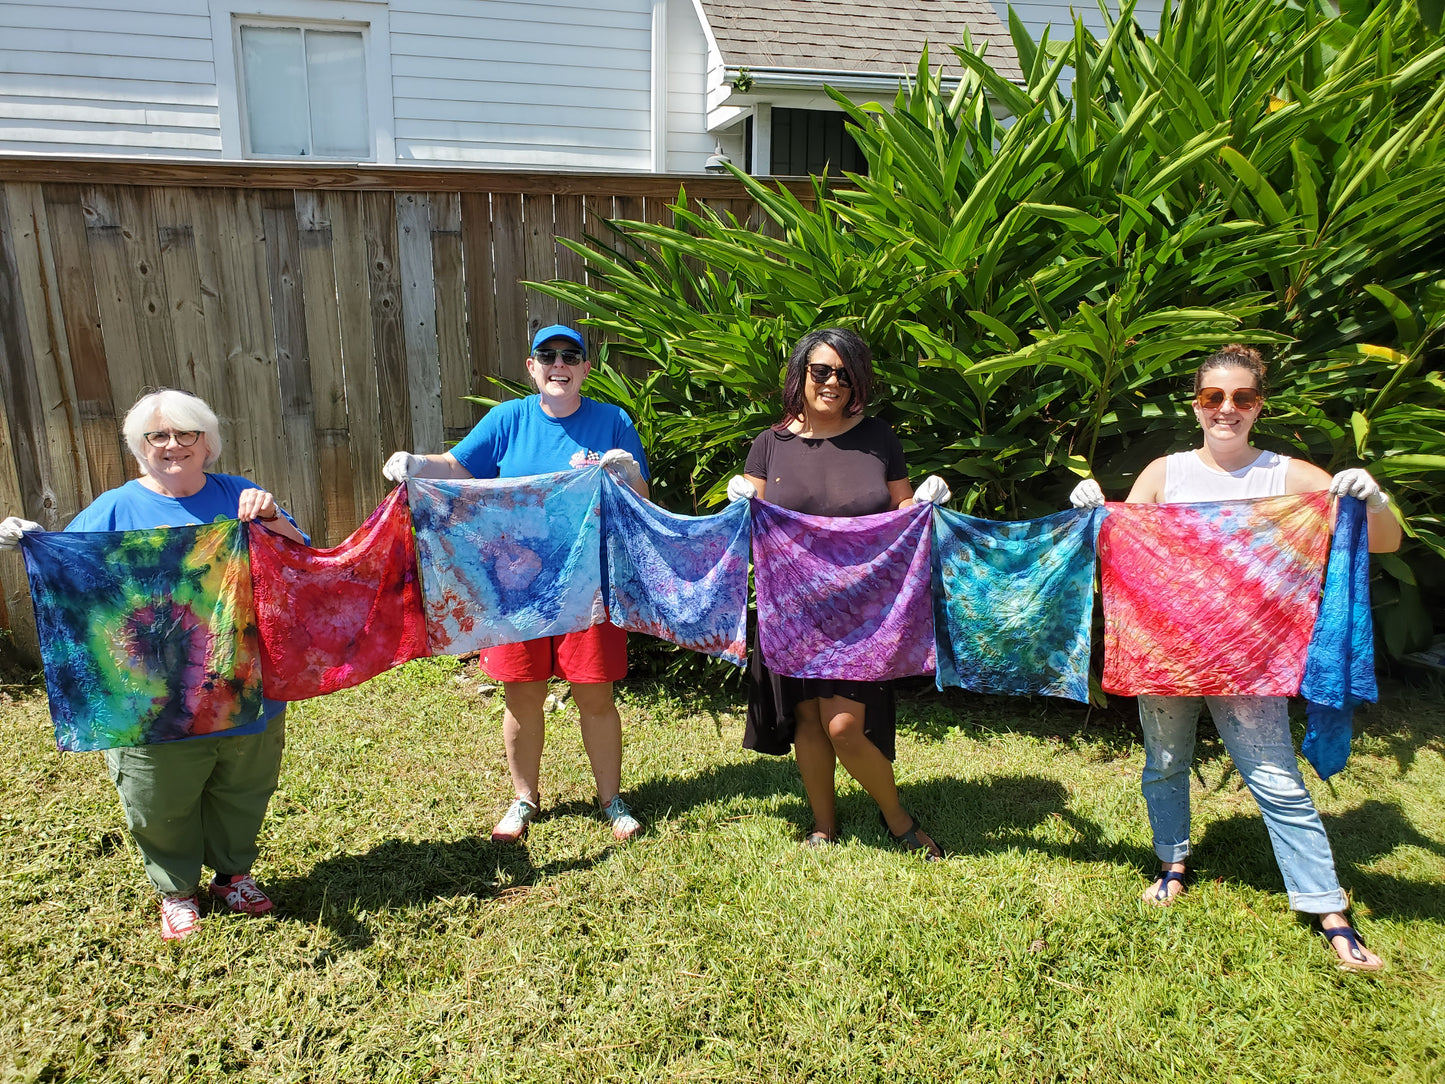 Ice Dye Workshop @ Home Malone Mid-City March 19th